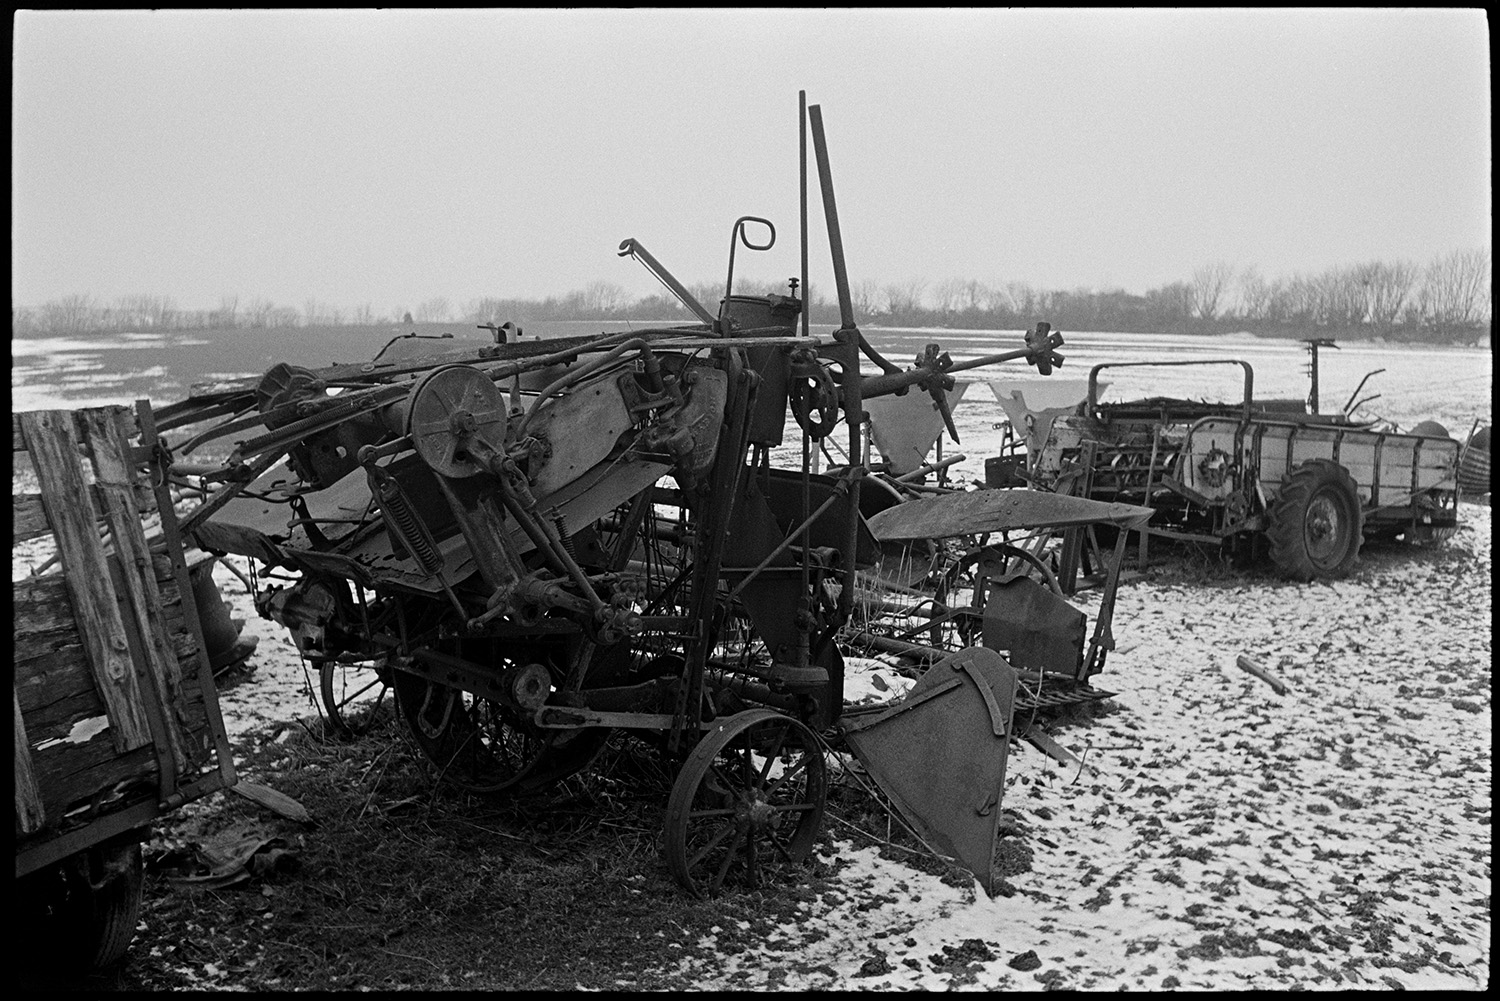 Snow, old rusting implements lying in field, plough, circular saw, reap and binder.
[Old plough and other disused farm equipment piled in a field lightly covered in snow, at Ashwell Farm, Dolton.]